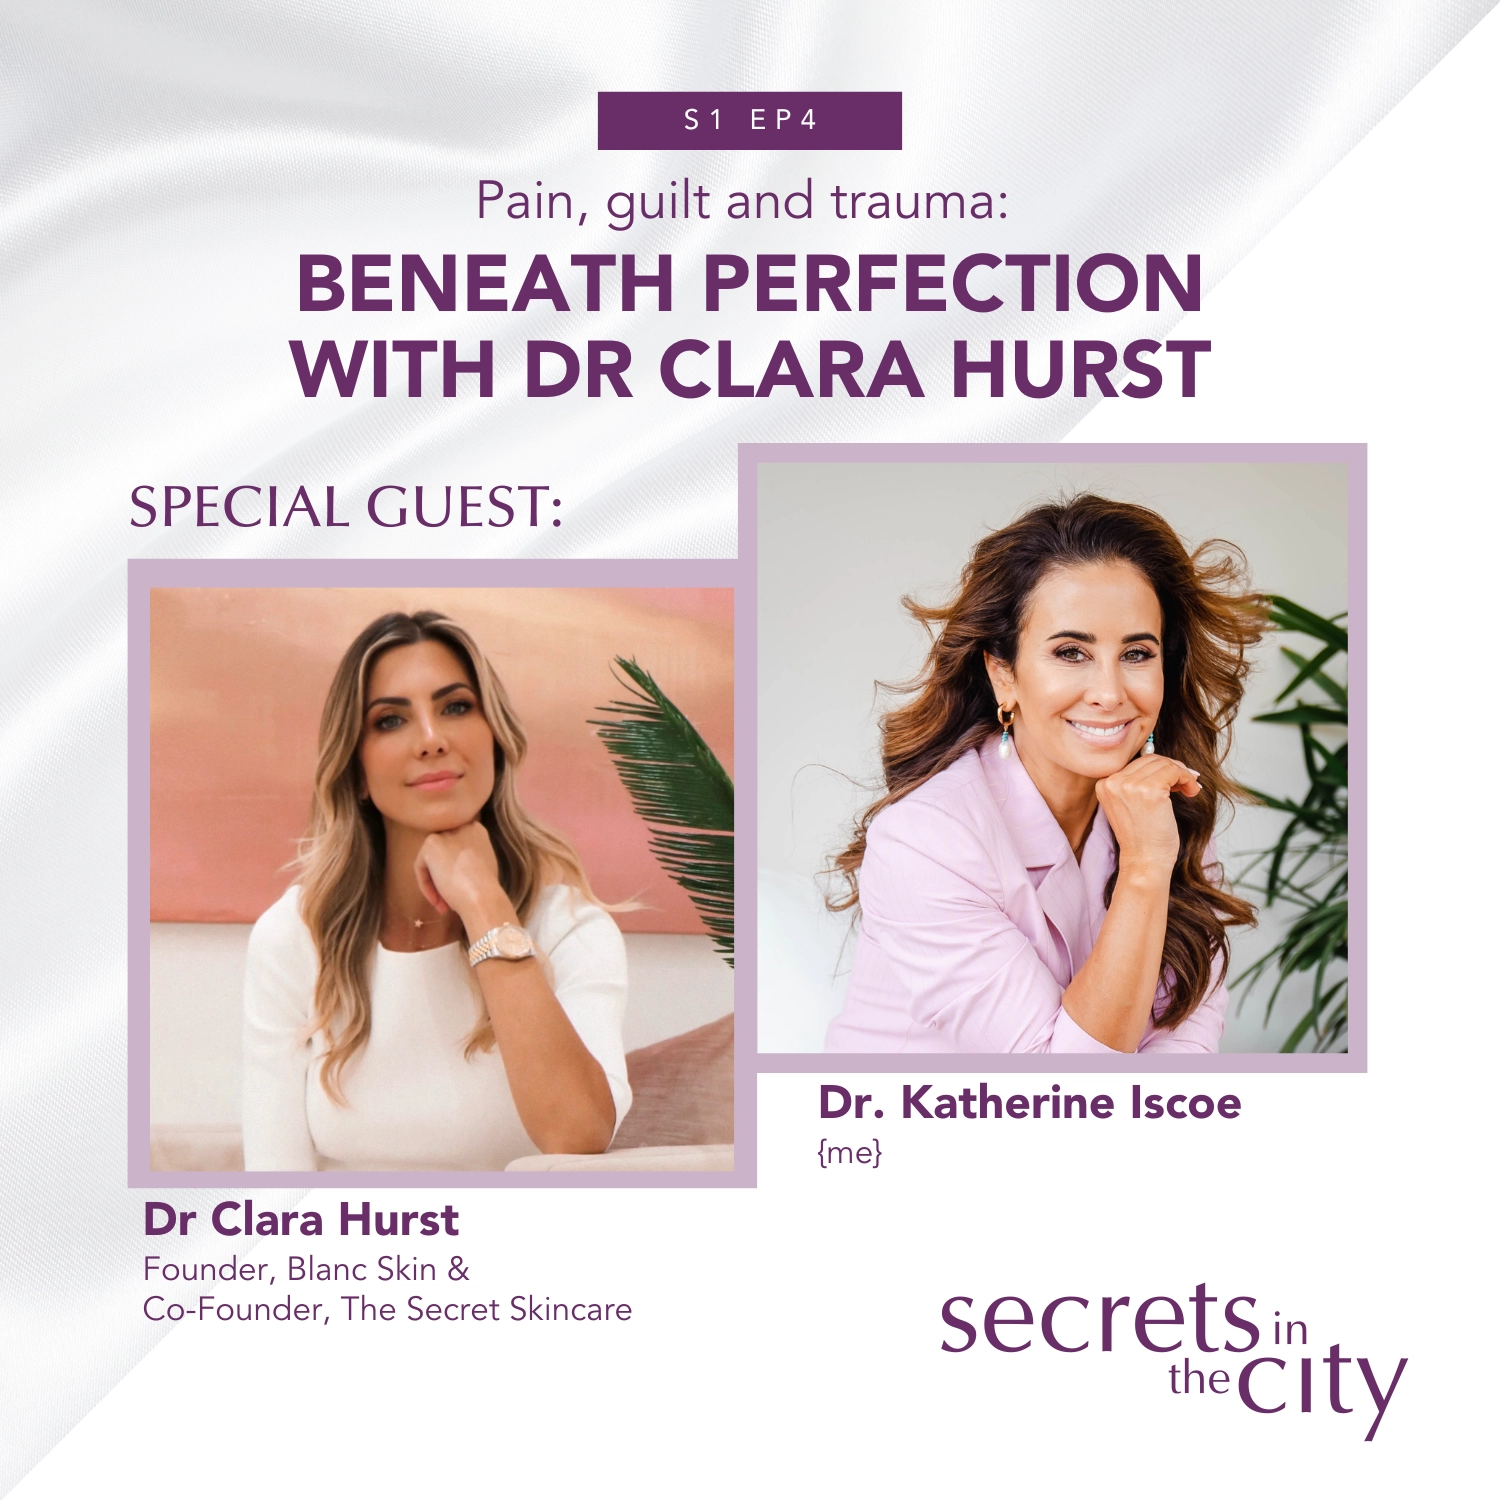 The pain, guilt and trauma beneath perfection with Dr Clara Hurst